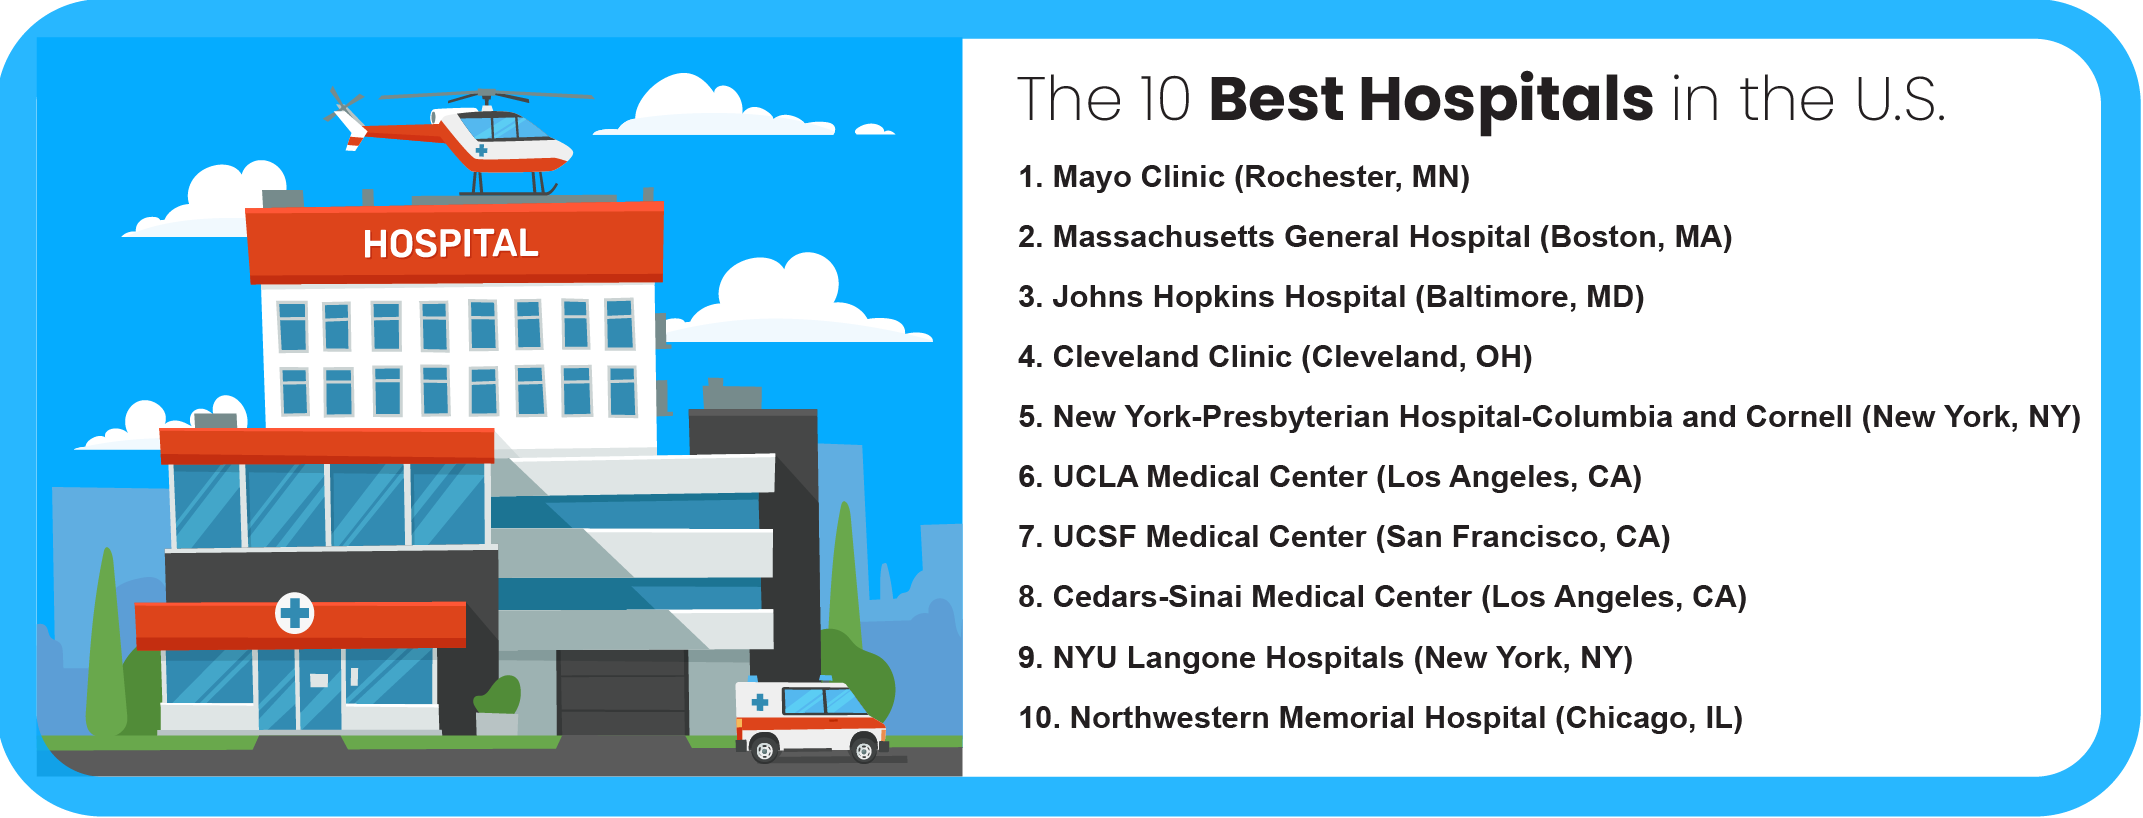 The 10 best hospitals in the United States.